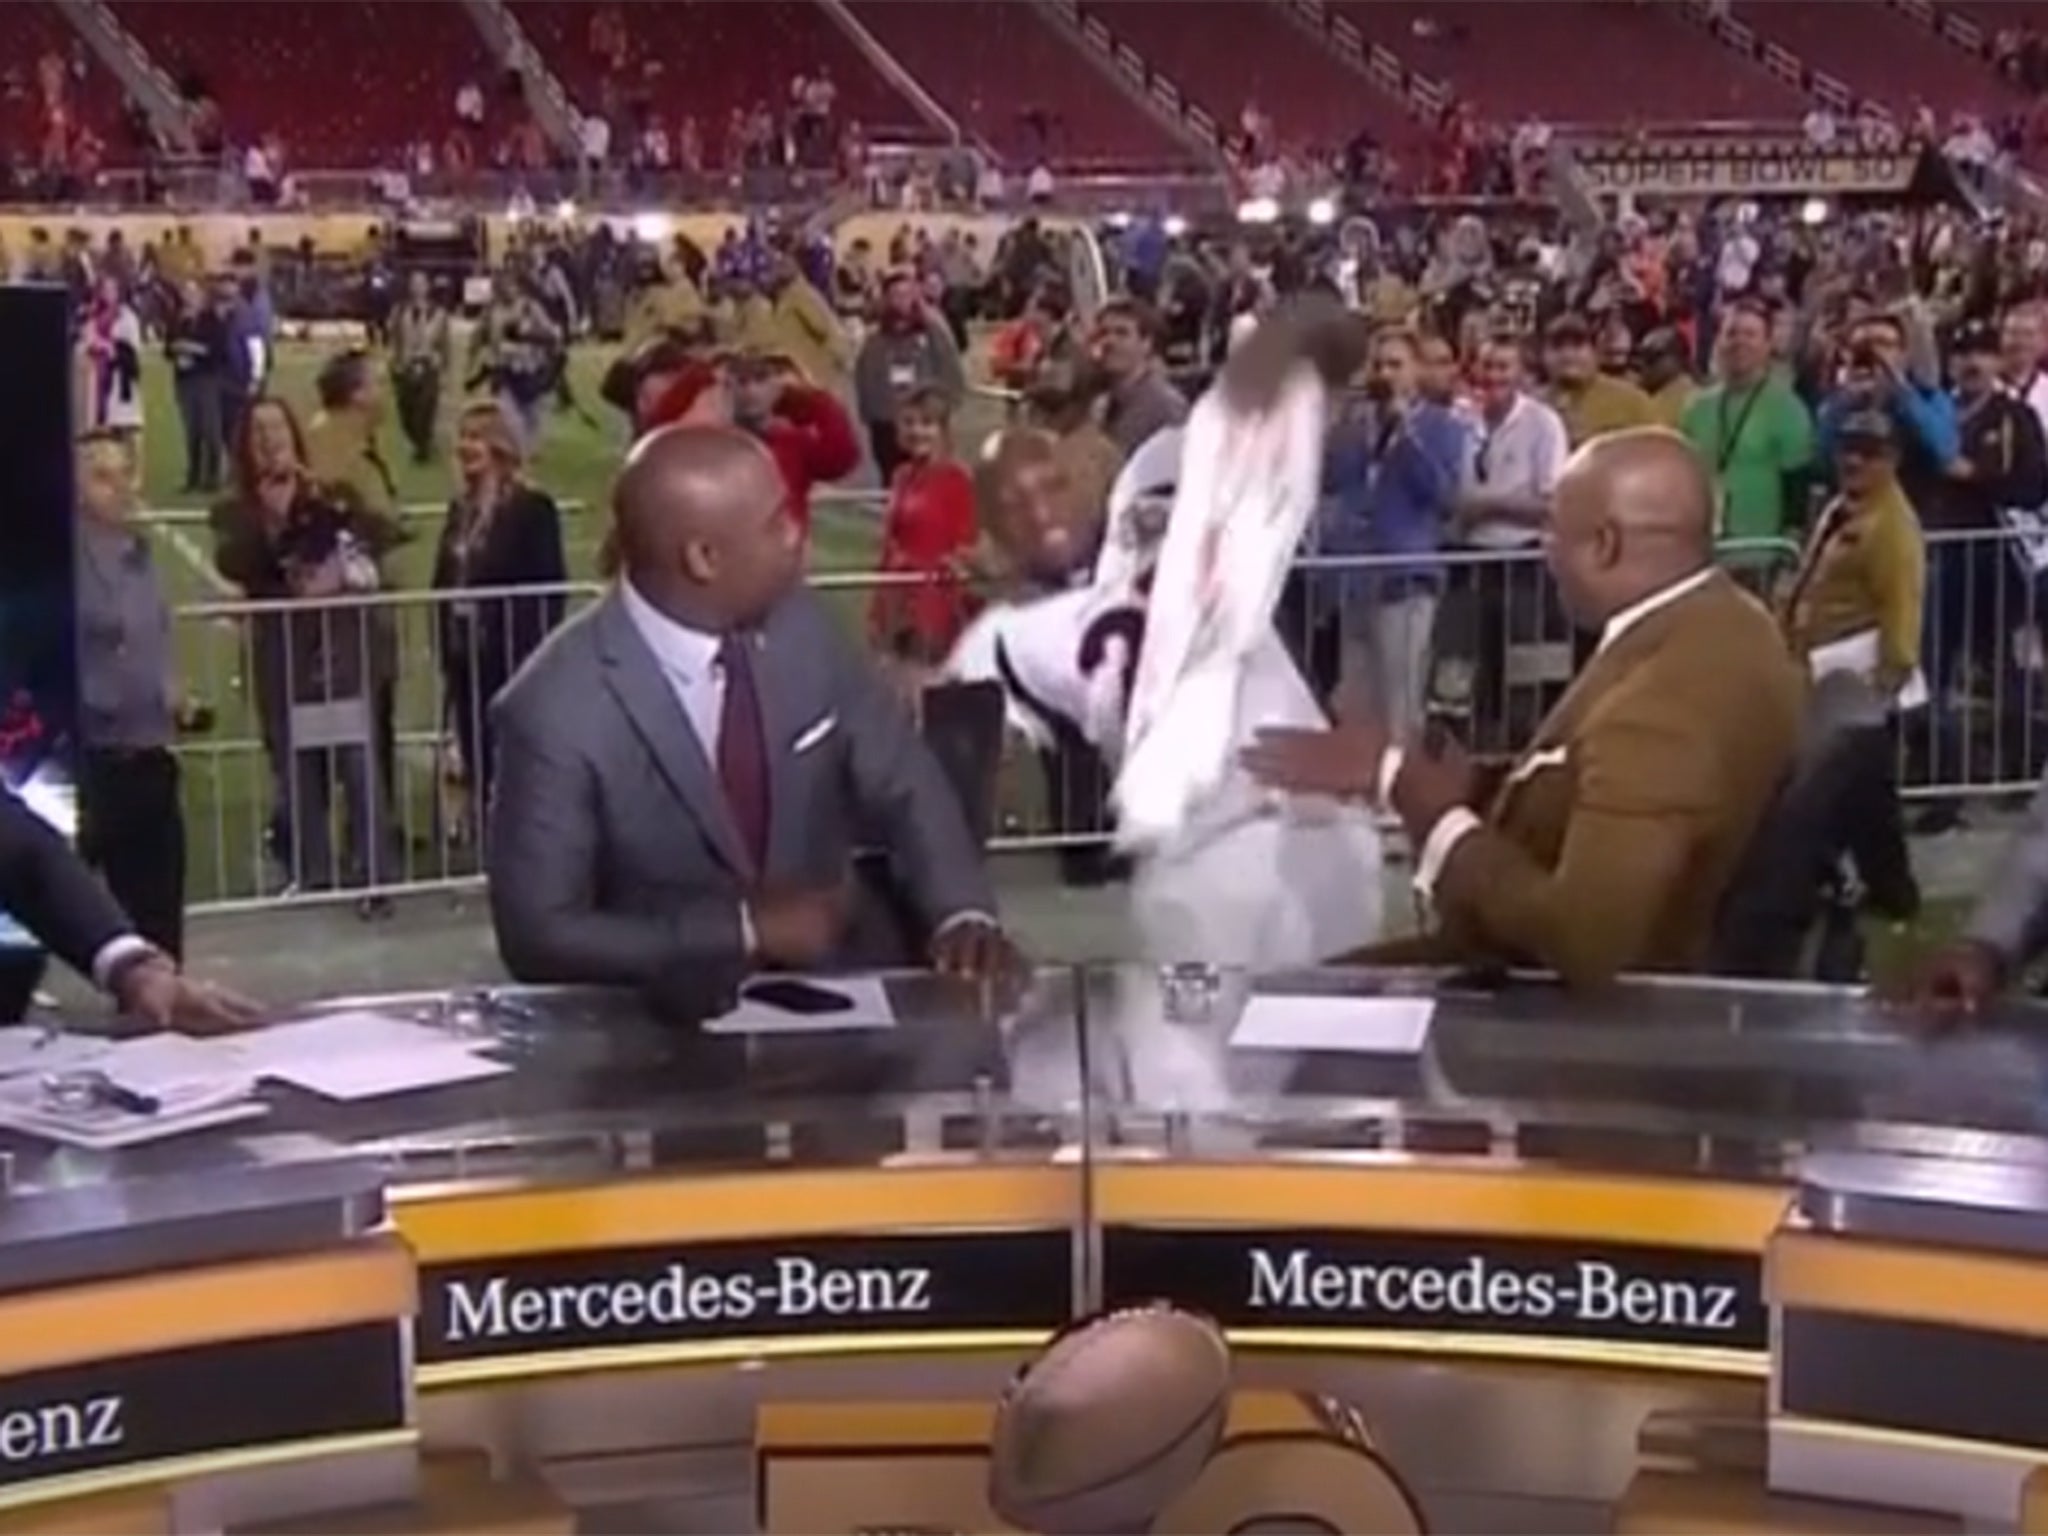 Aqib Talib slips while running over to the NFL Network crew